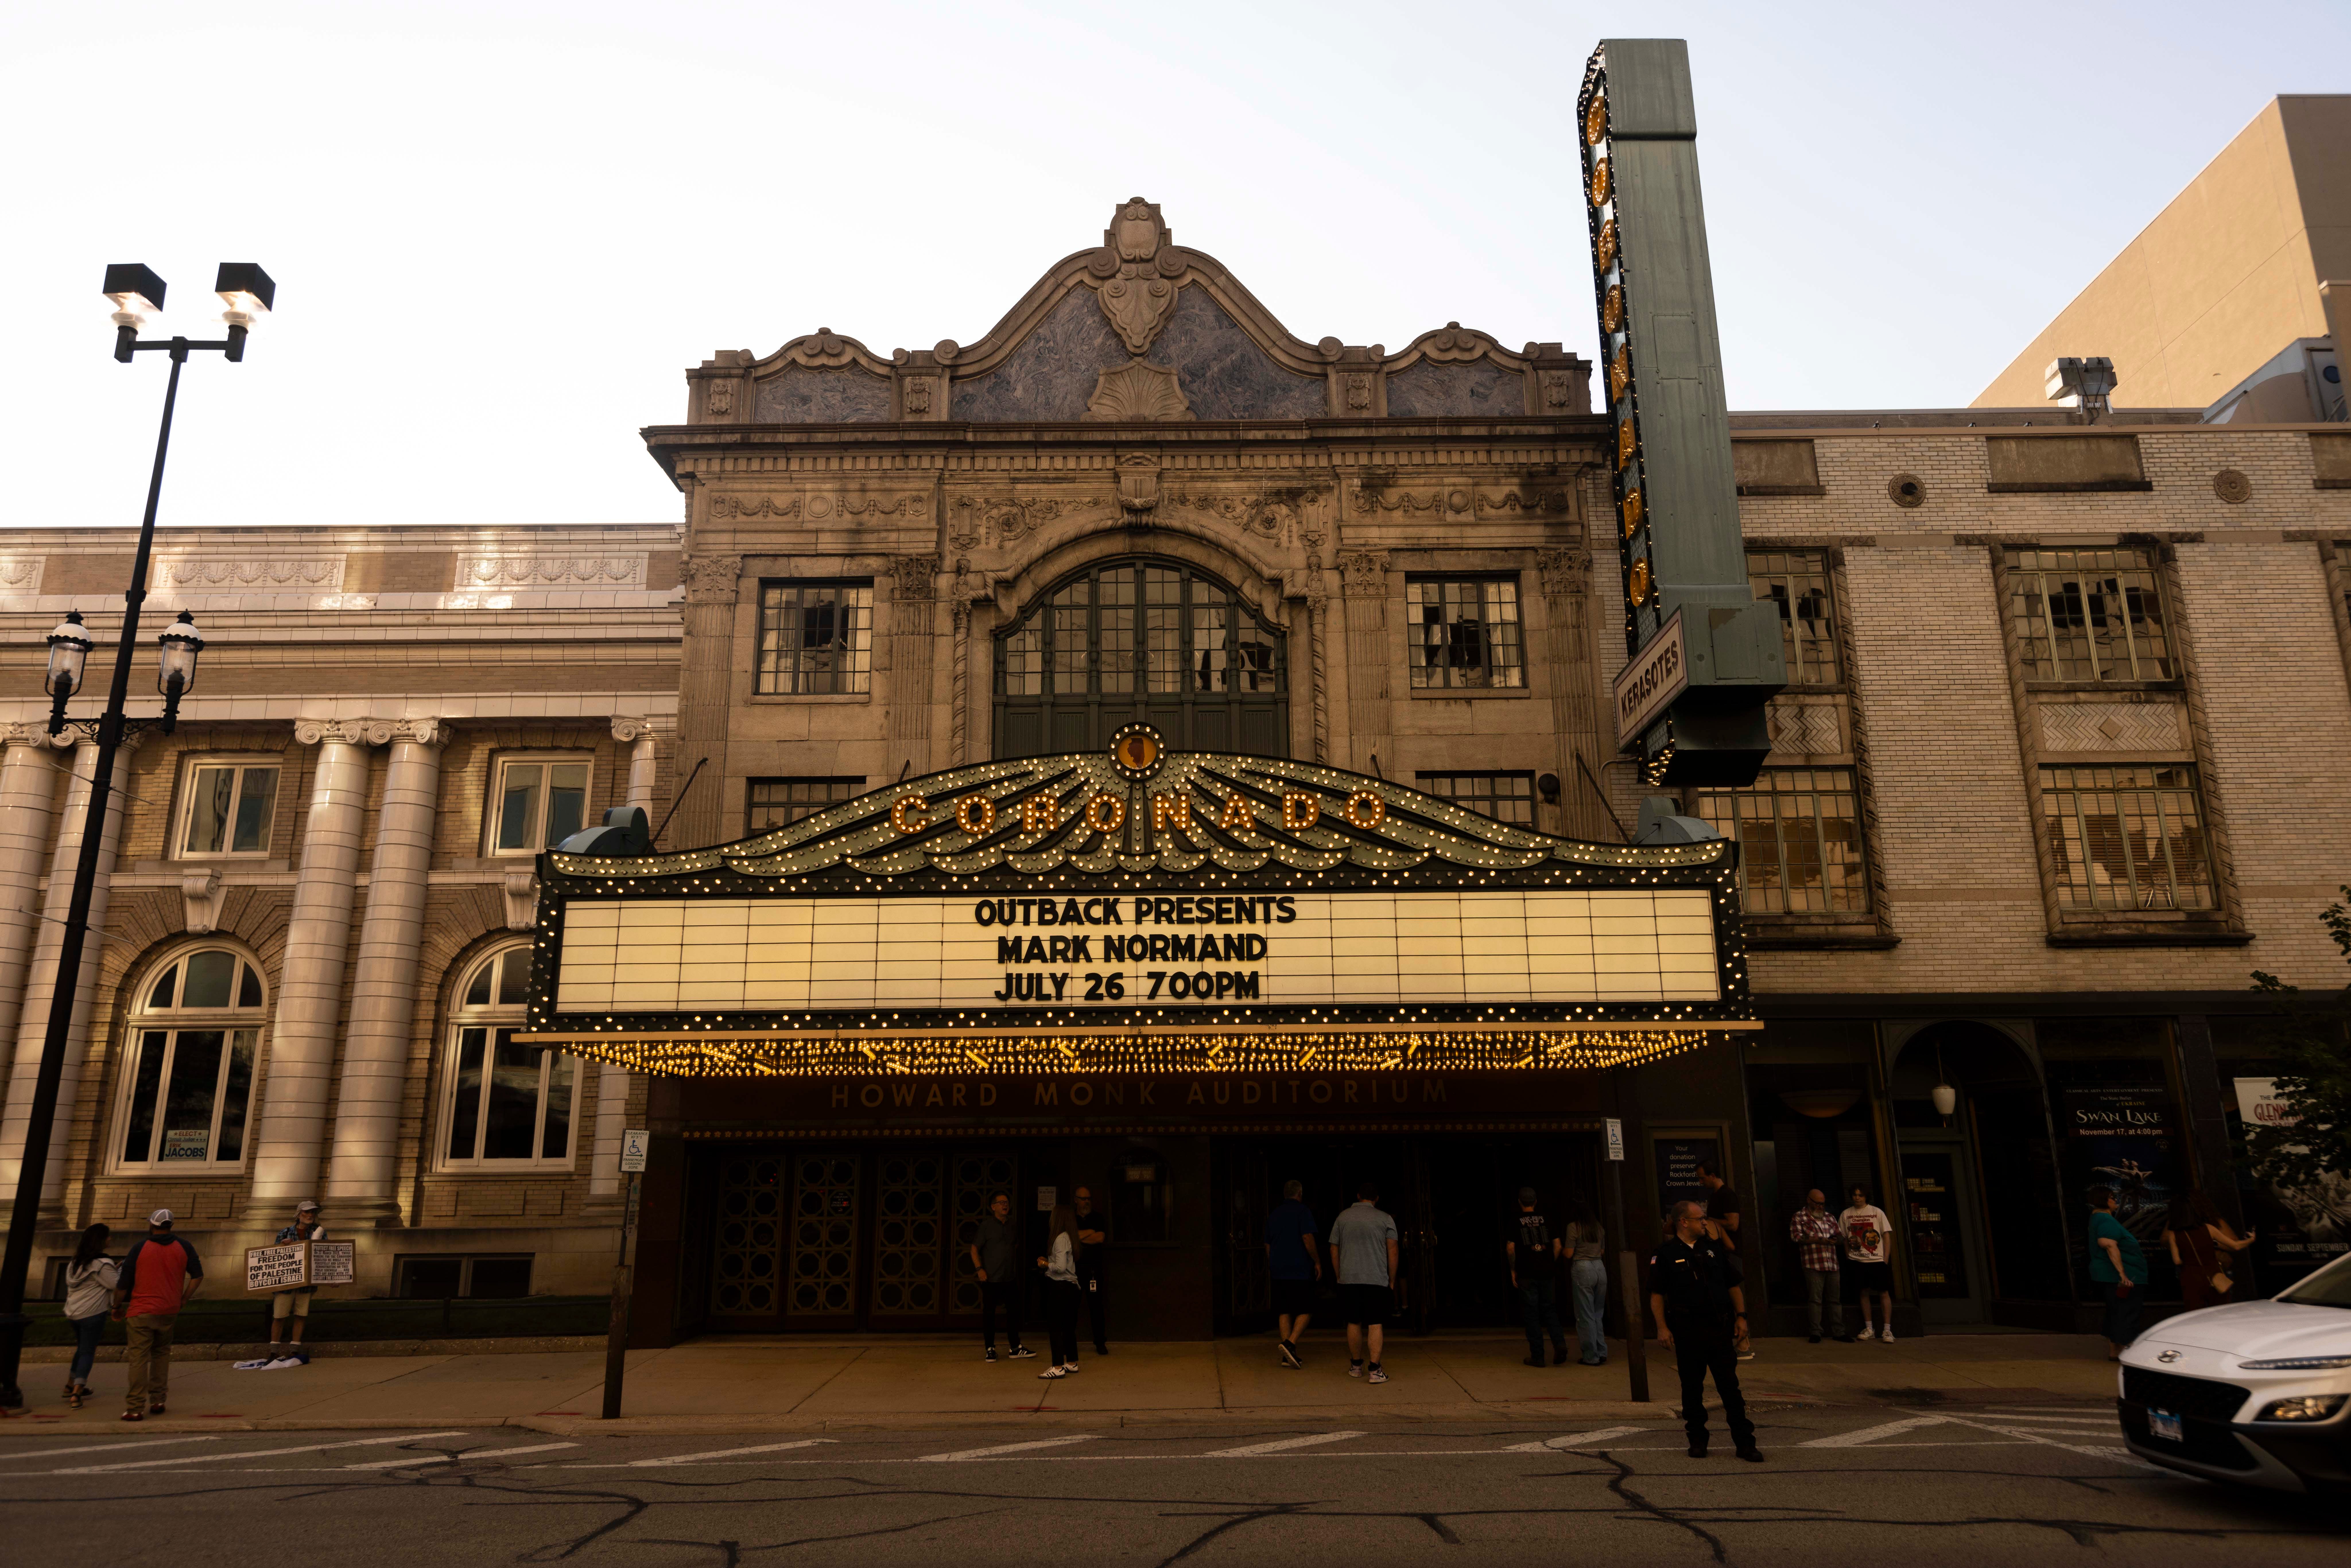 Downtown Rockford theater is set to get $3 million facelift. Here's what's being planned